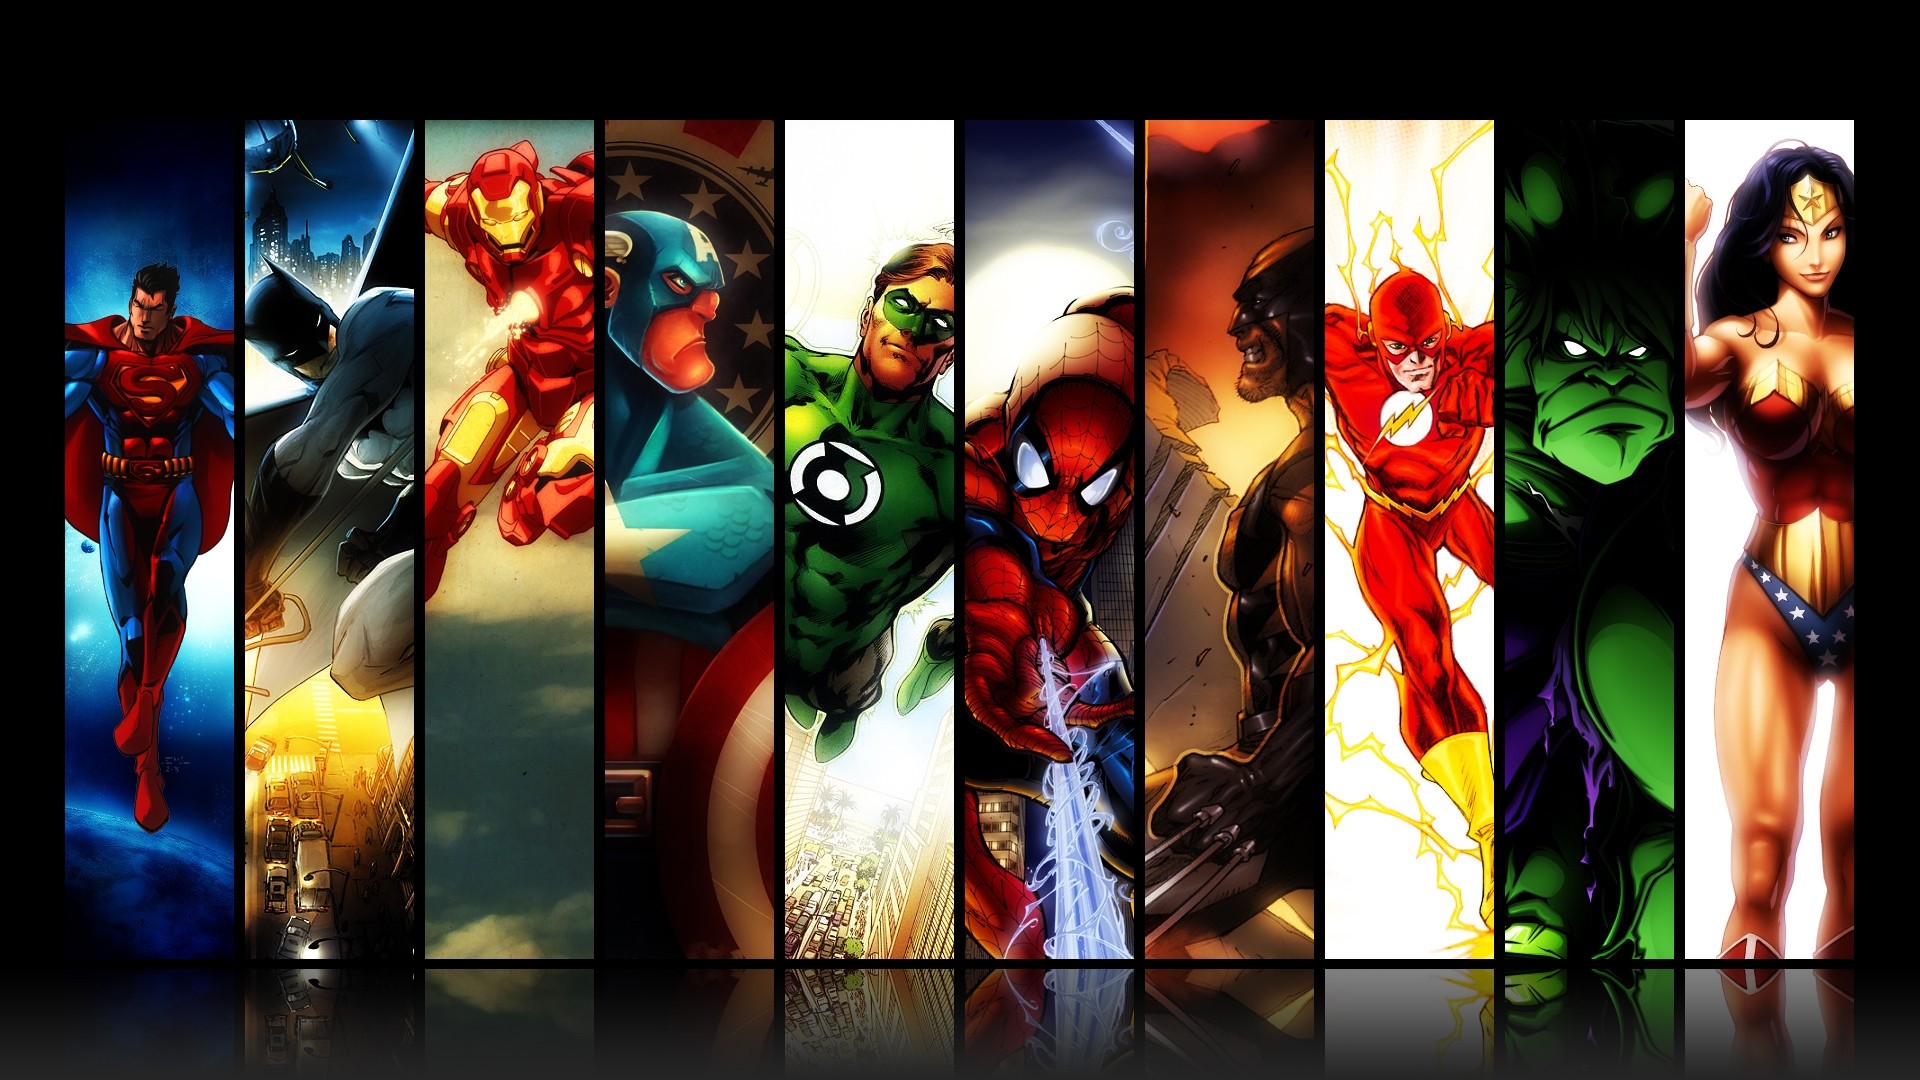 1920x1080 Related Wallpapers. marvel dc comic images siper heroes